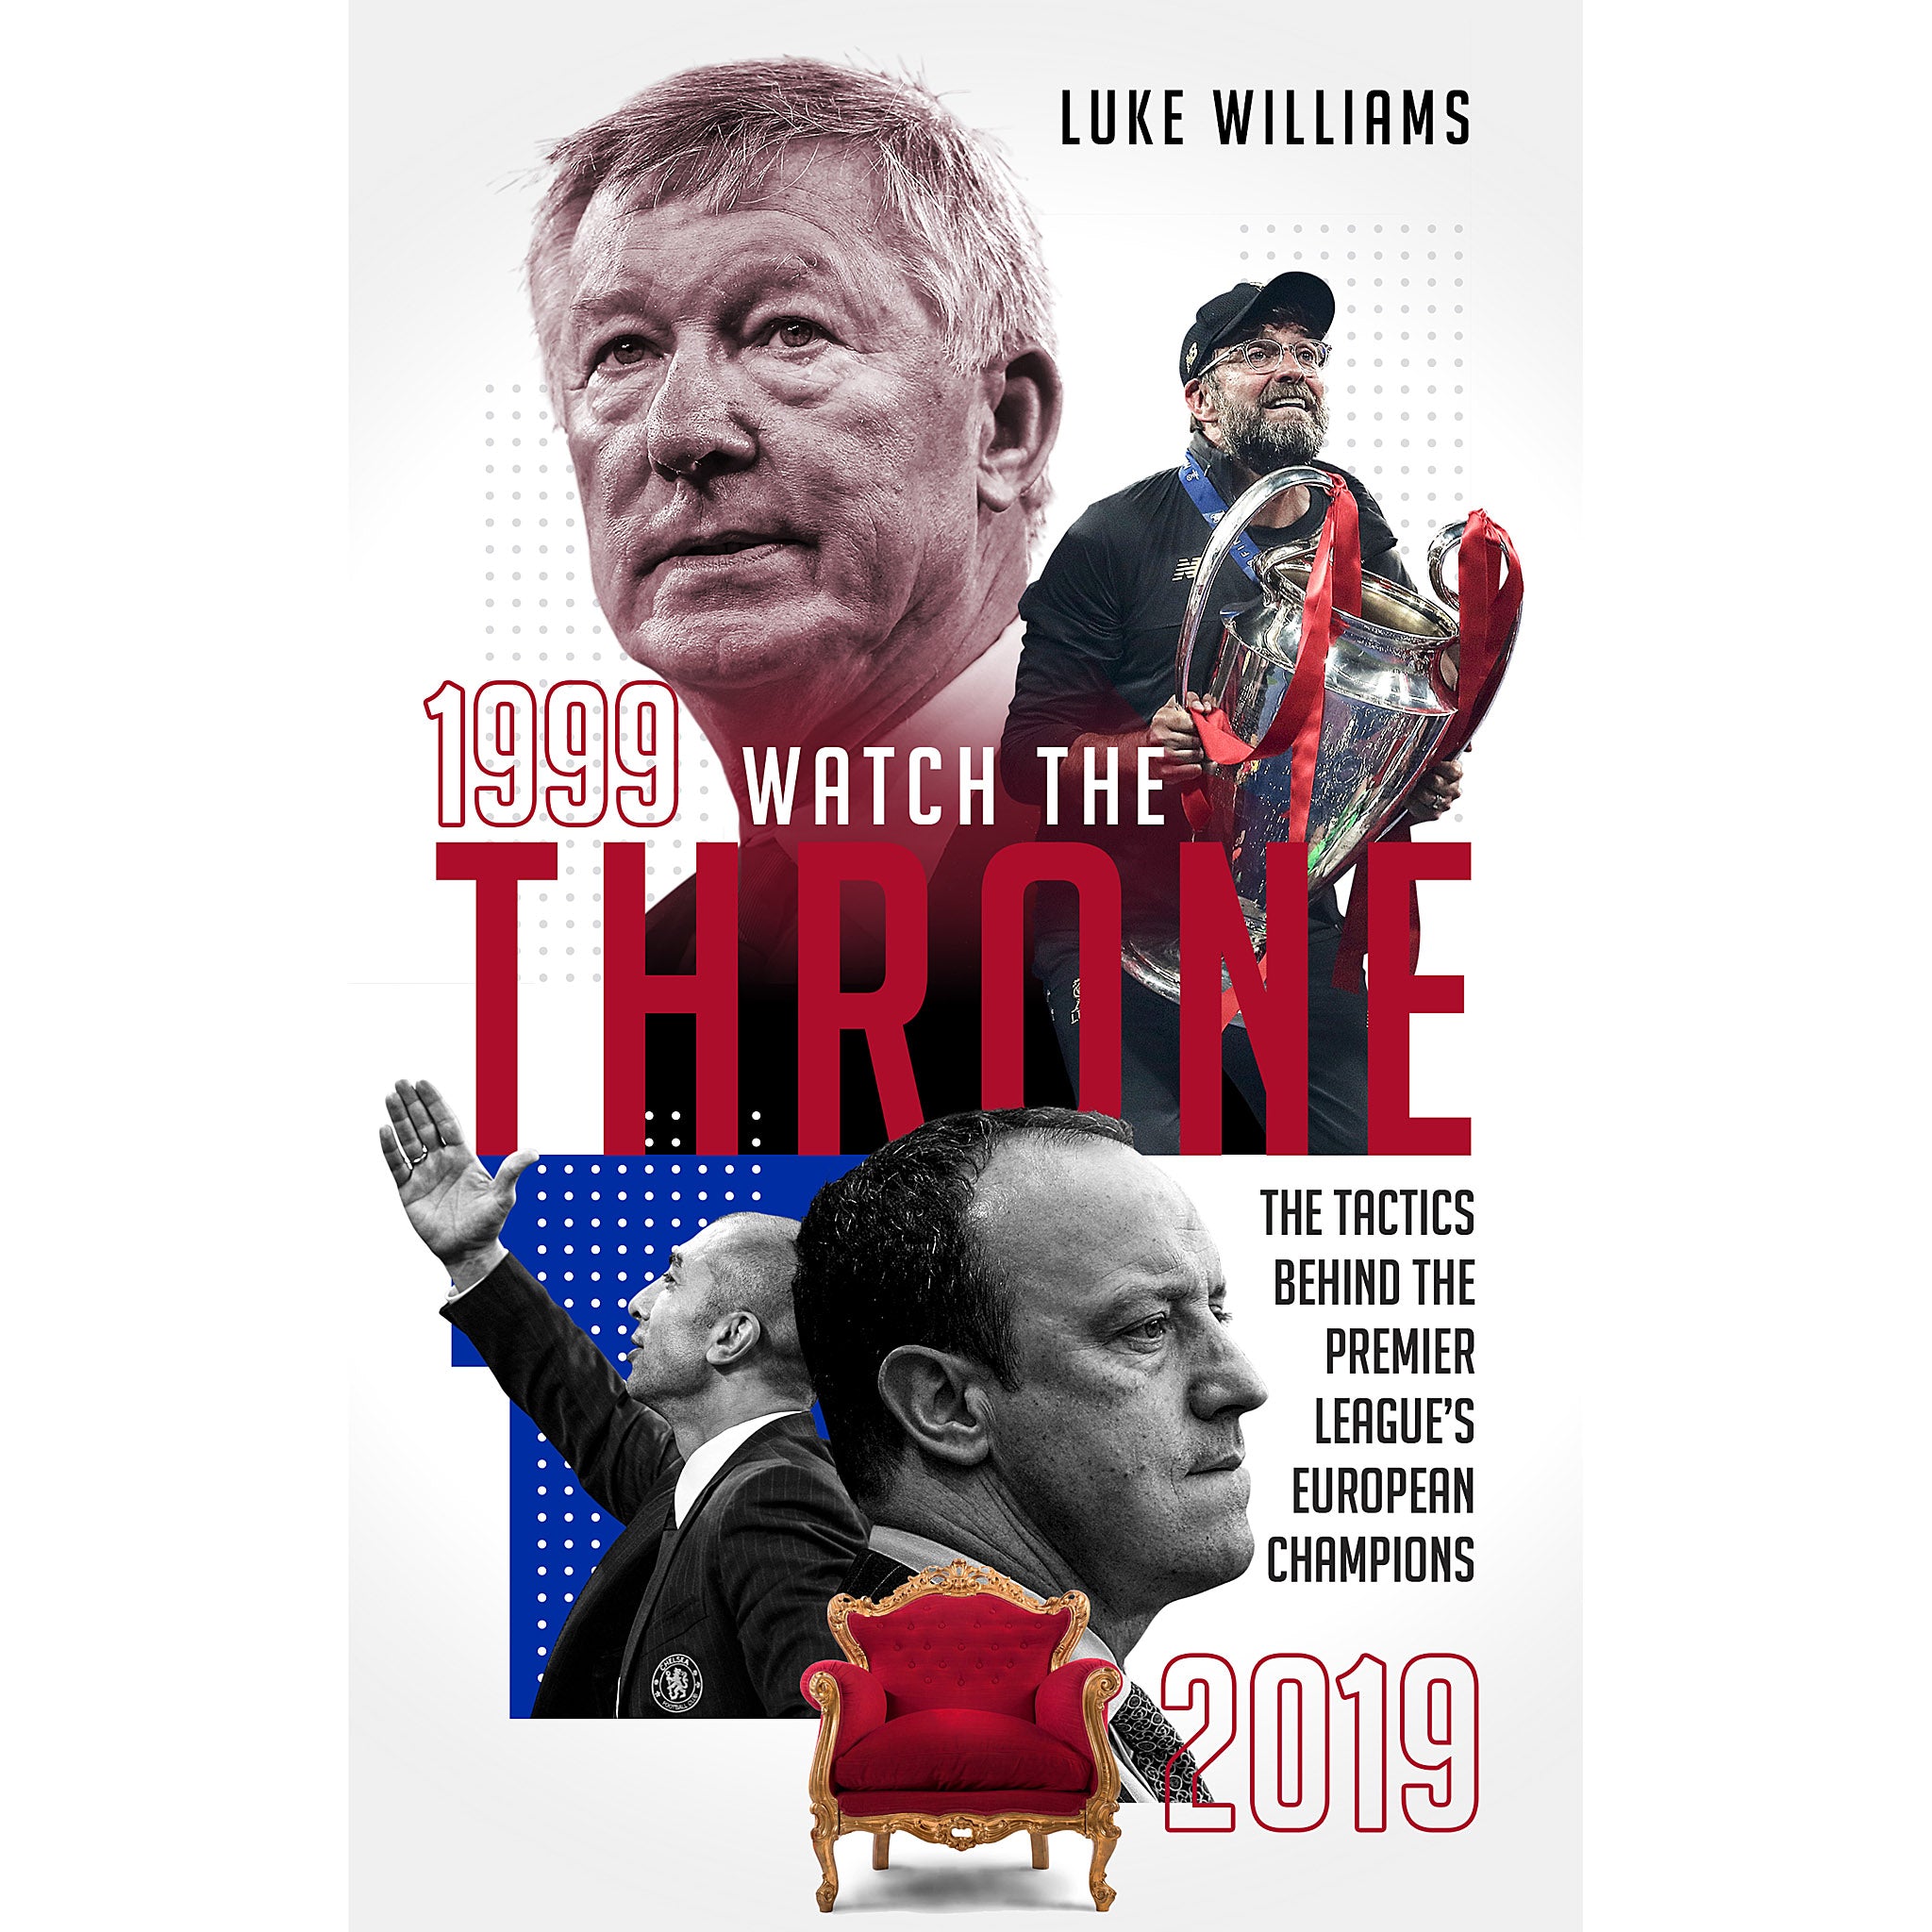 Watch the Throne – The Tactics Behind the Premier League's European Champions 1999-2019